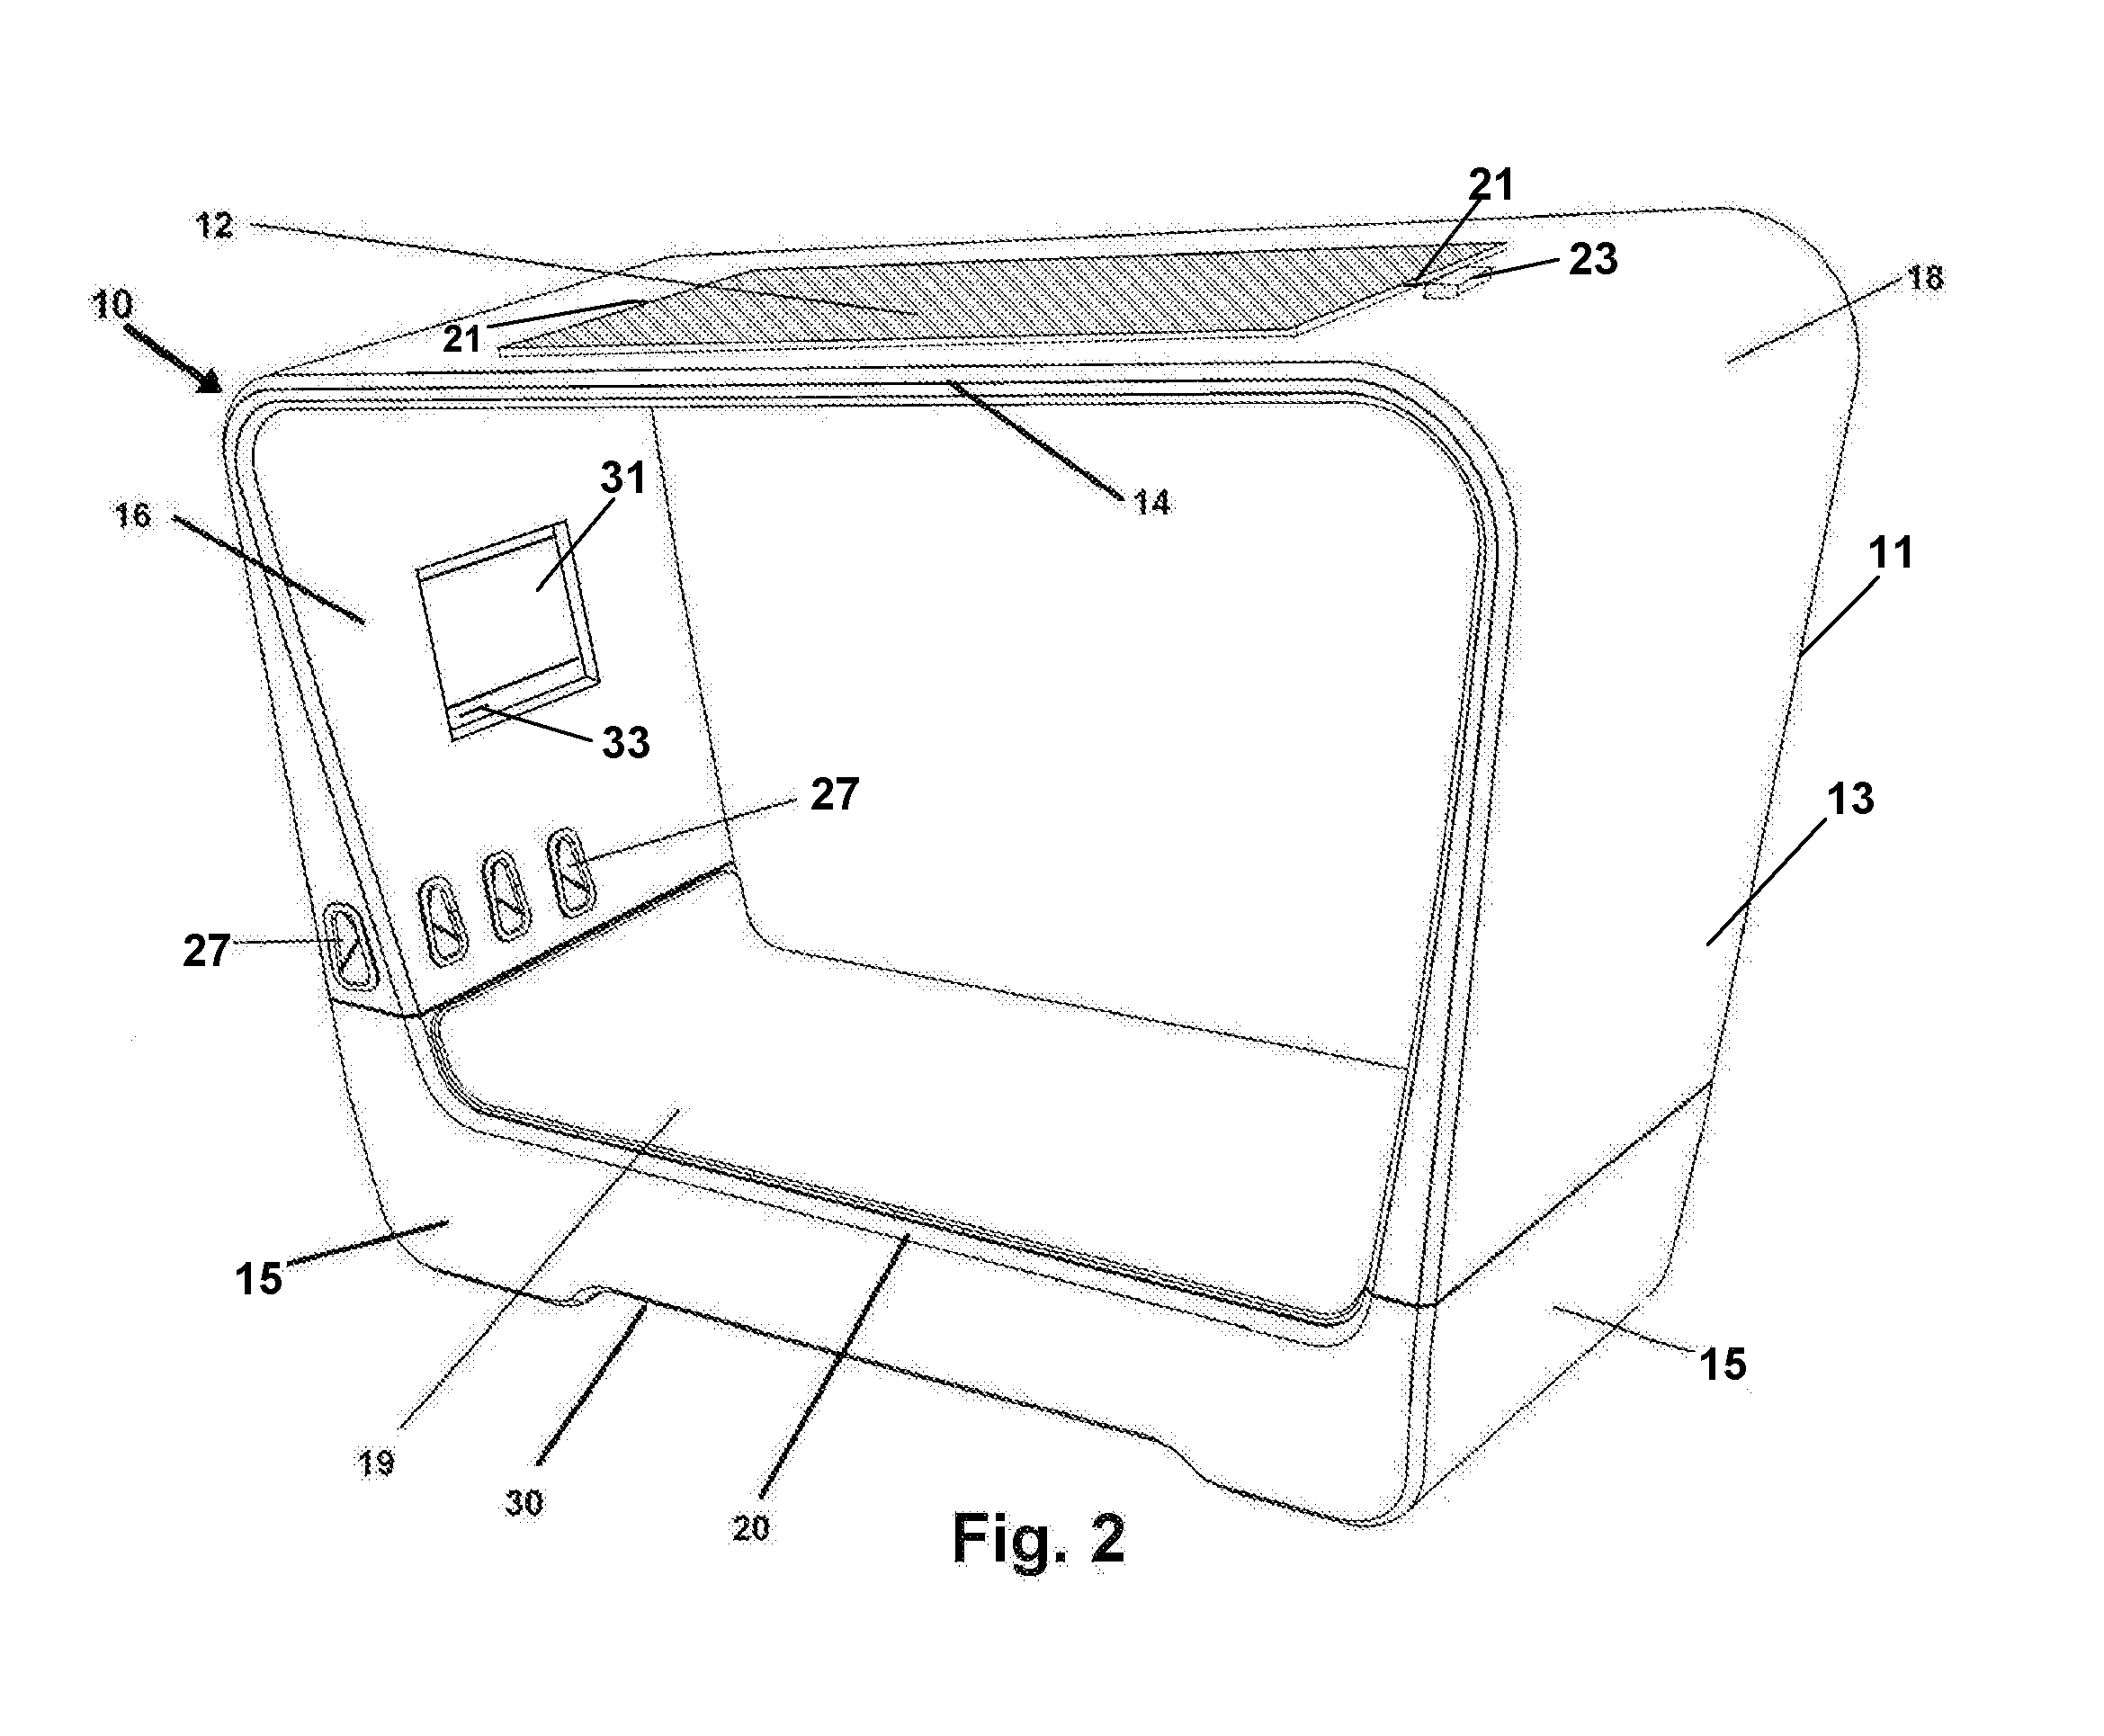 Portable Recharging Station With Shaded Seating and Method